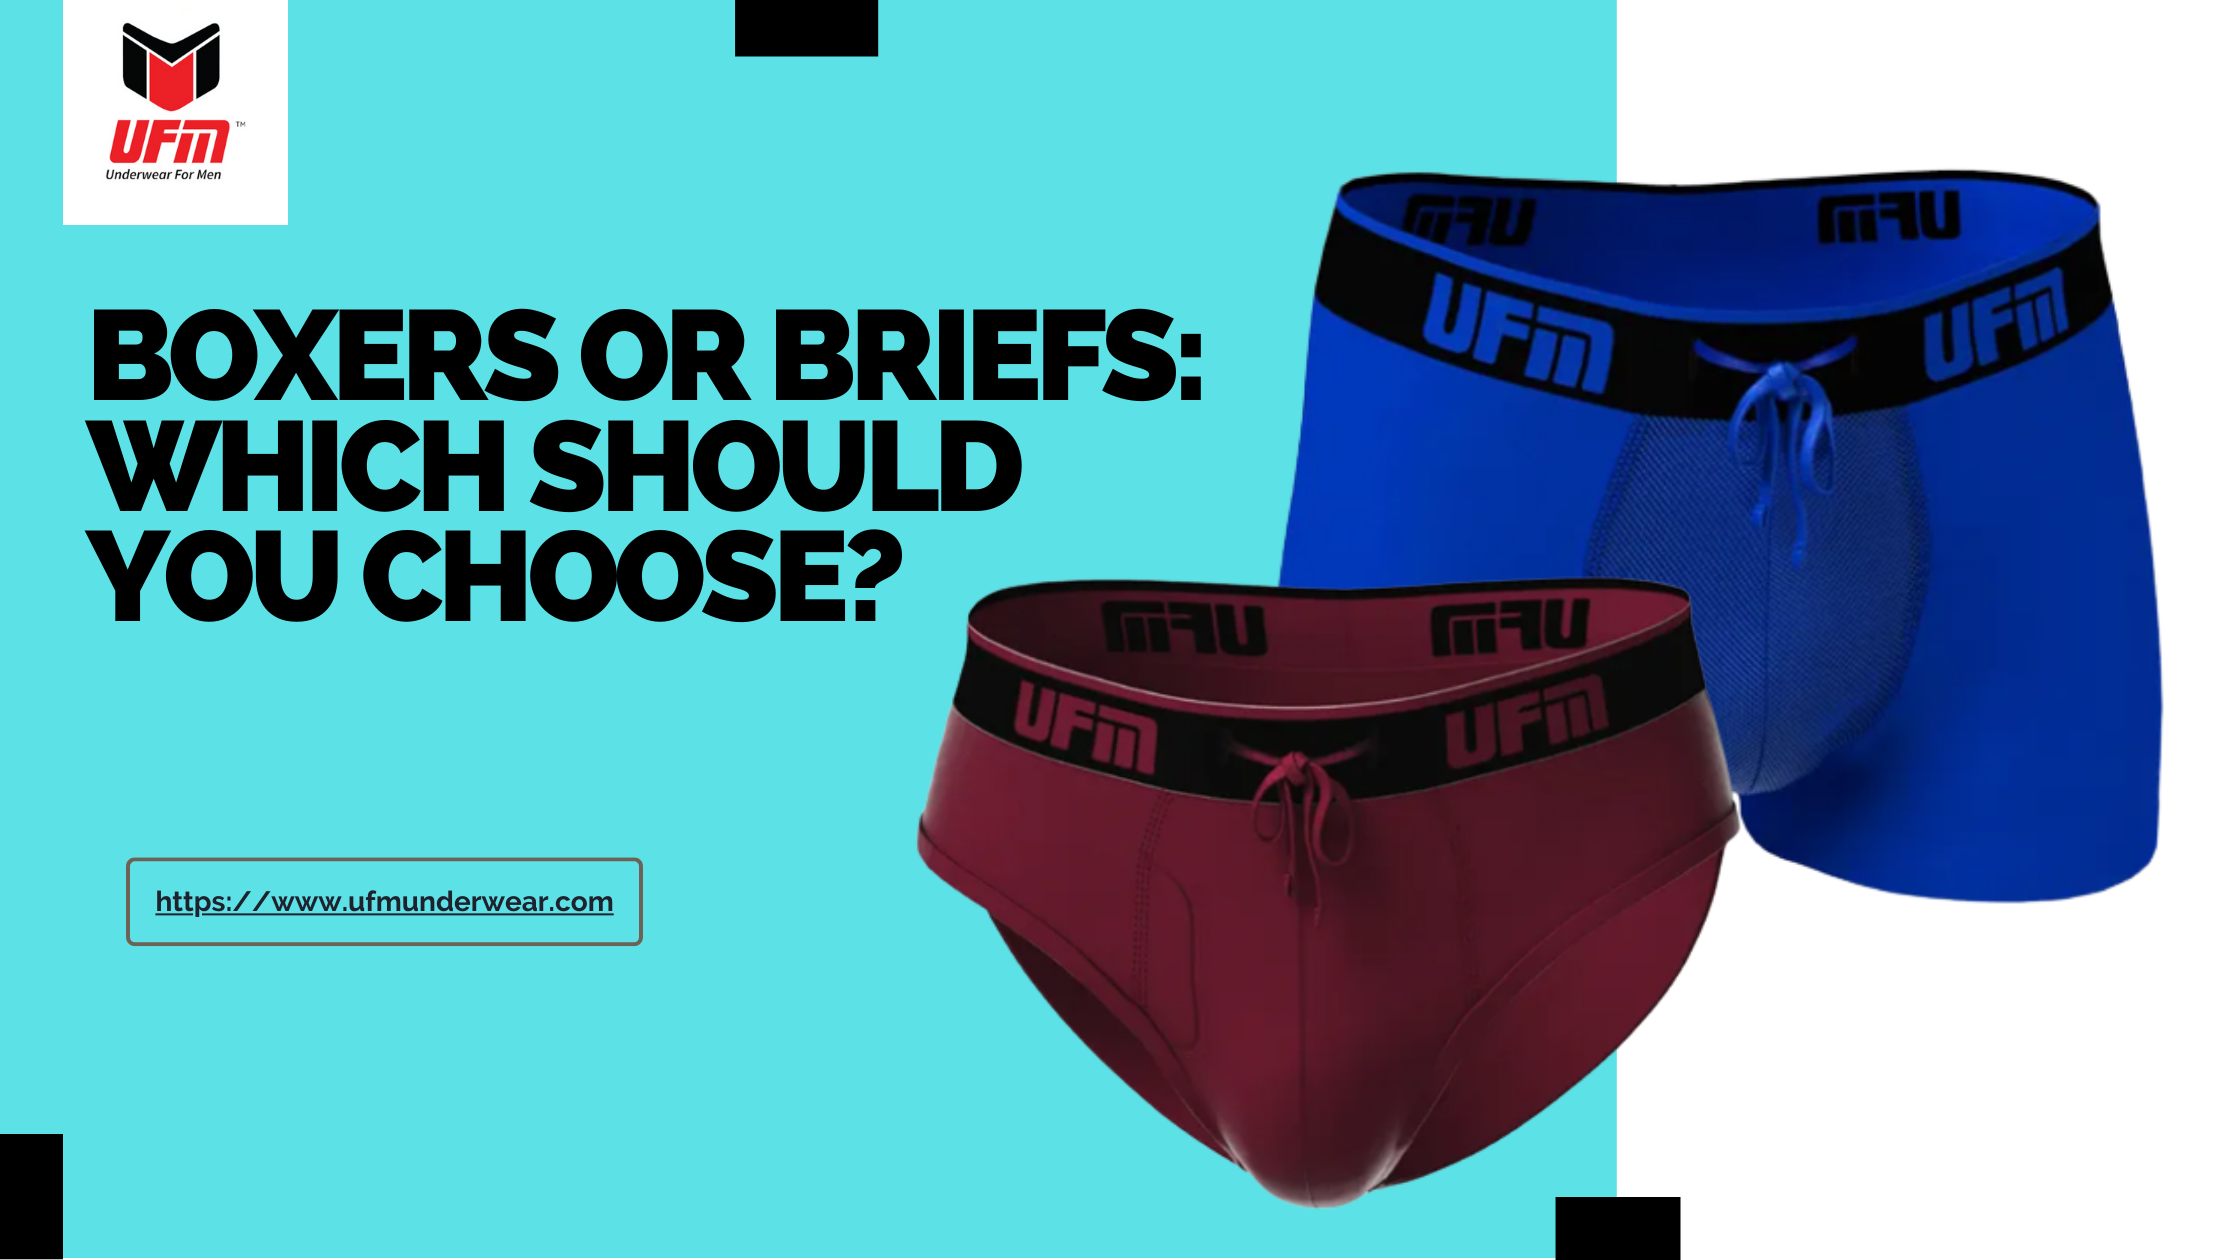 For men's briefs (tighty whities) do you prefer Hanes or Fruit of